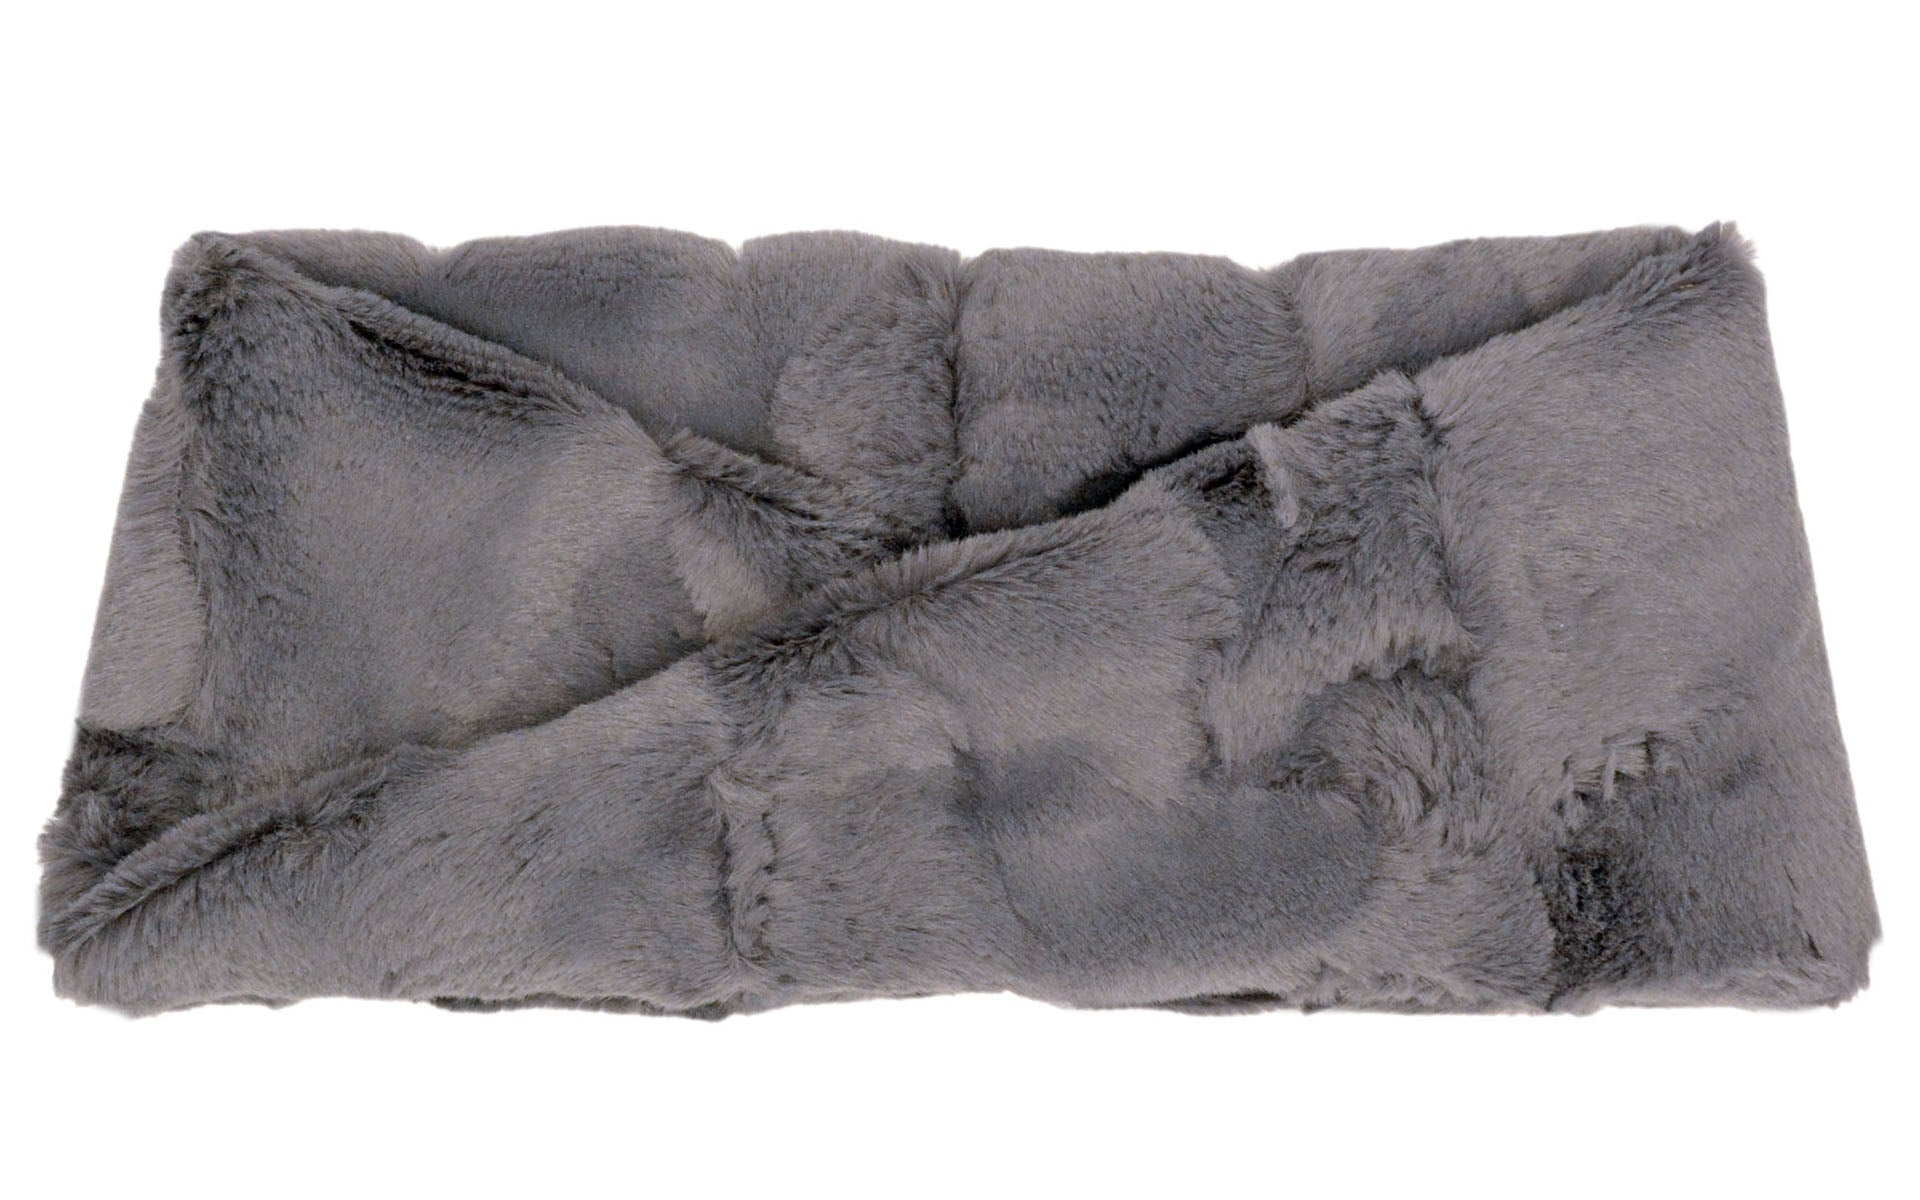 Headband| Cuddly Faux Fur in Cool Gray | Handmade in the USA bye Pandemonium Seattle